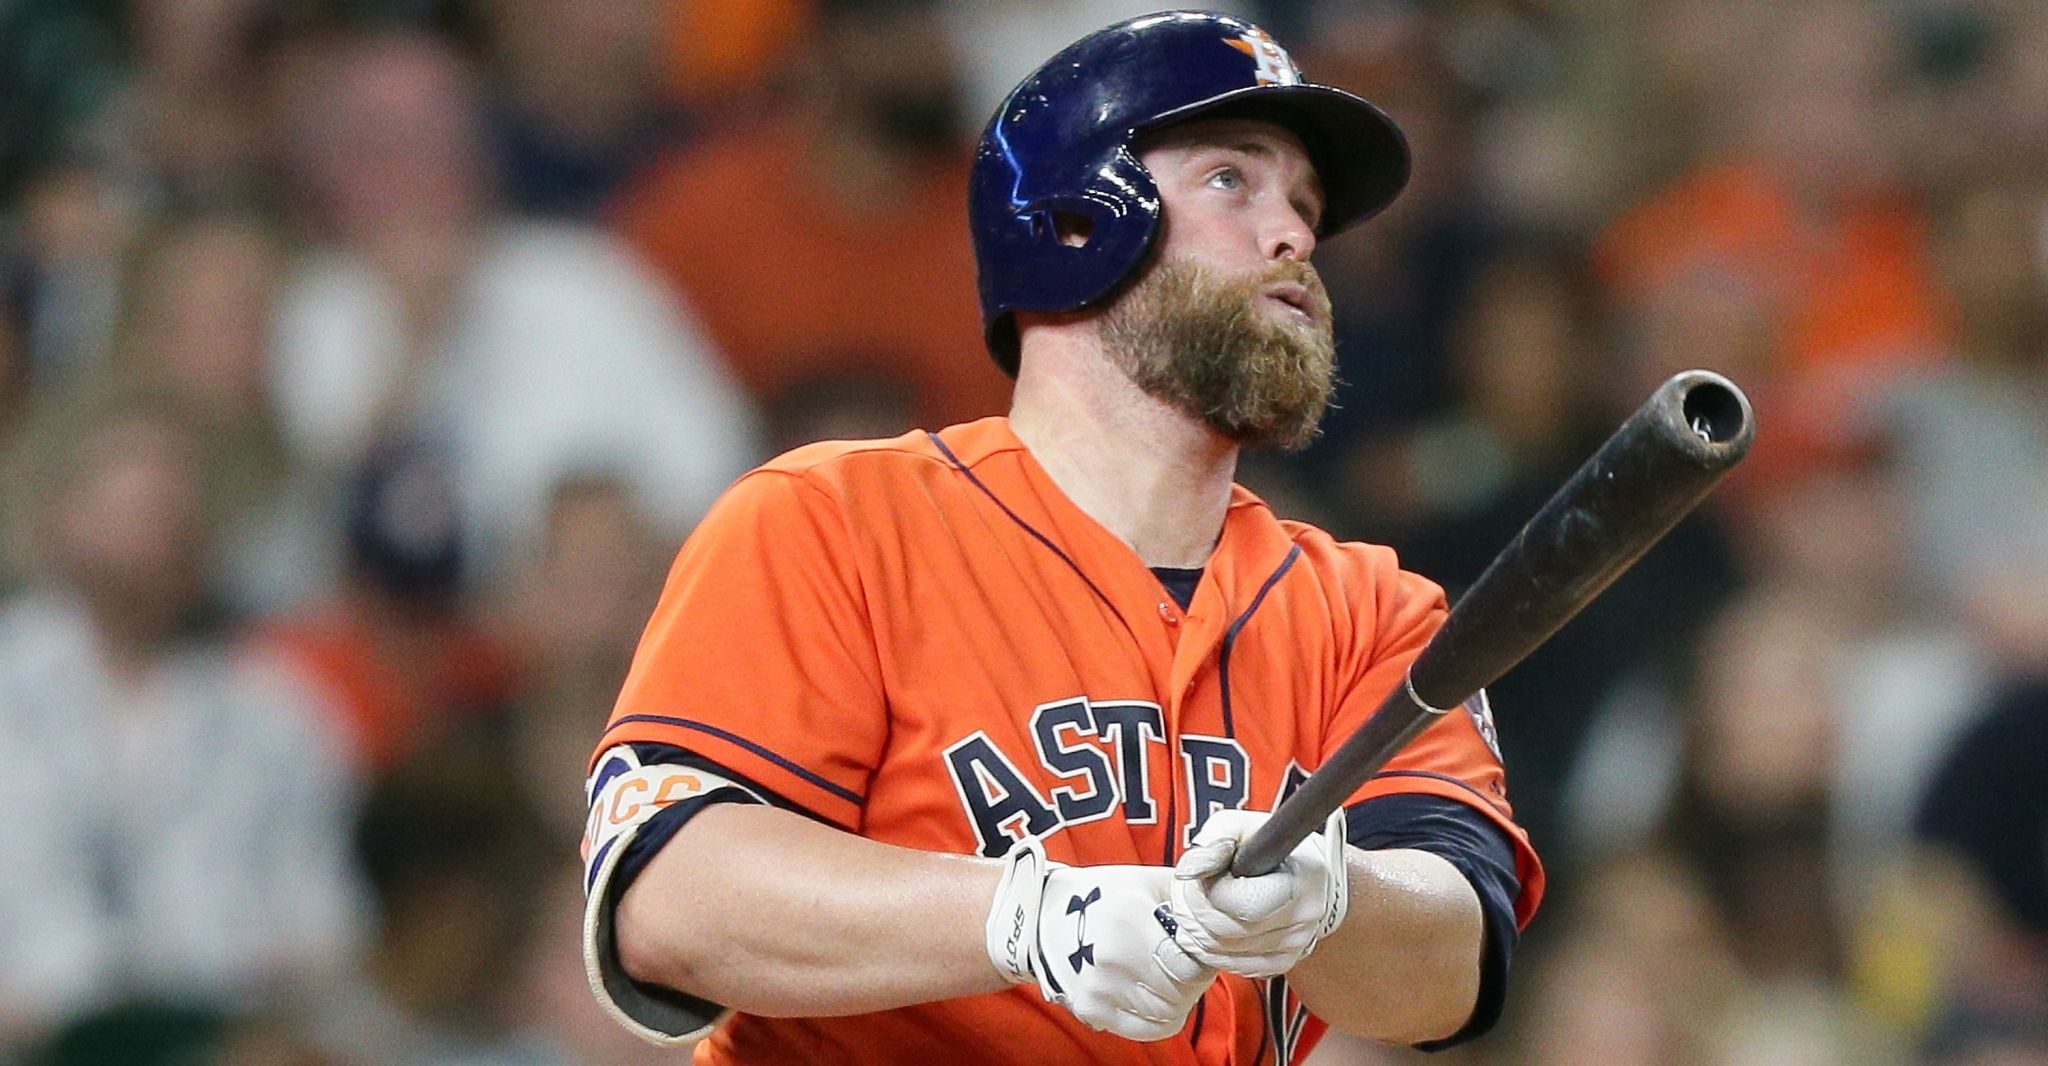 Adjusted swing making Astros' Brian McCann a force against lefthanders - Houston Chronicle